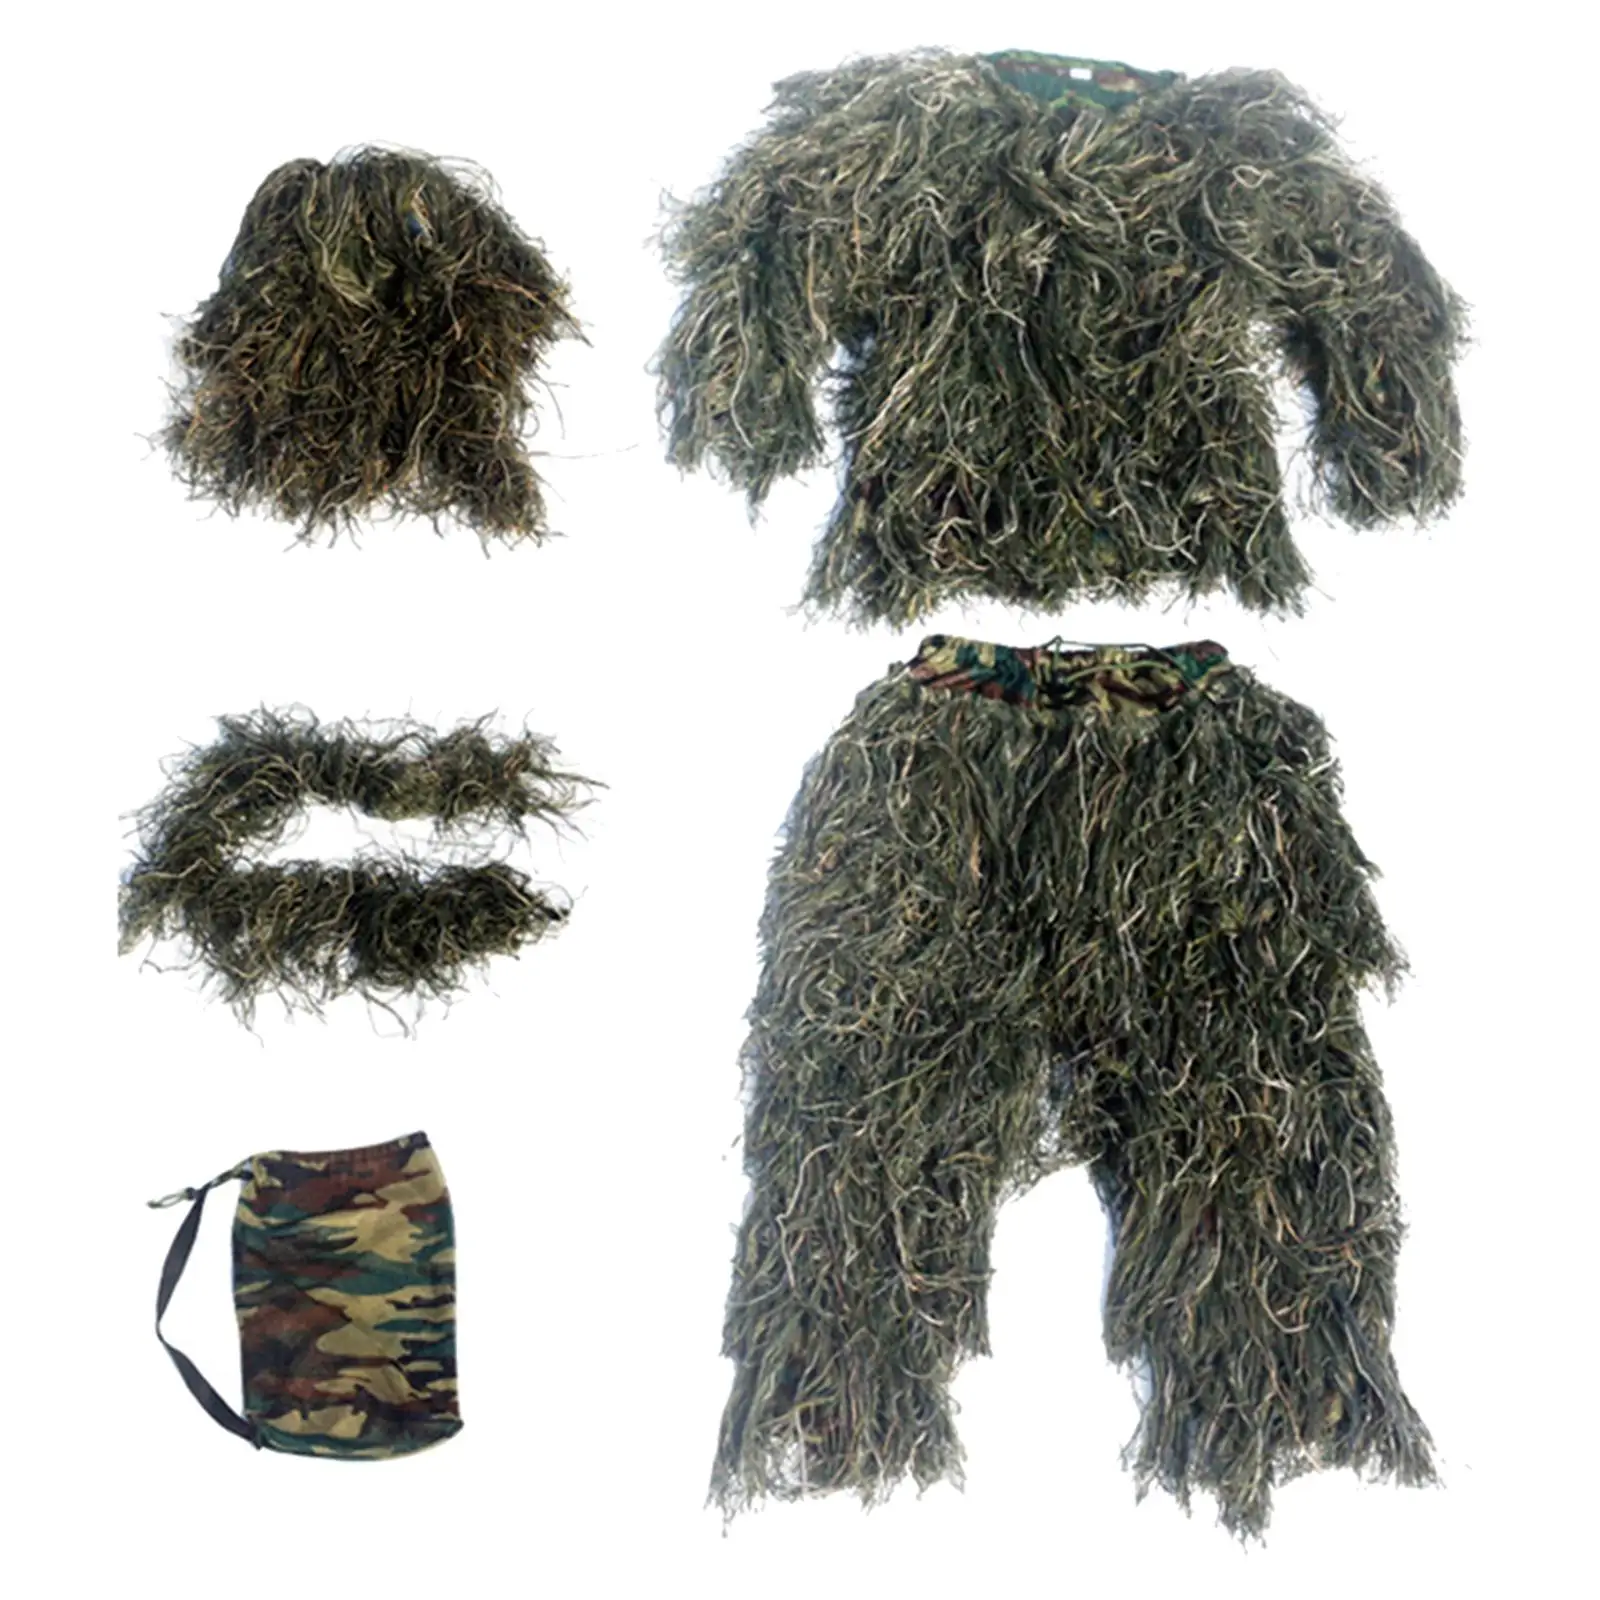 Ghillie Suit for Men Jacket Outfit Lightweight Disguise Woodland Pants Hat for Costume Halloween Camping Fishing Photography